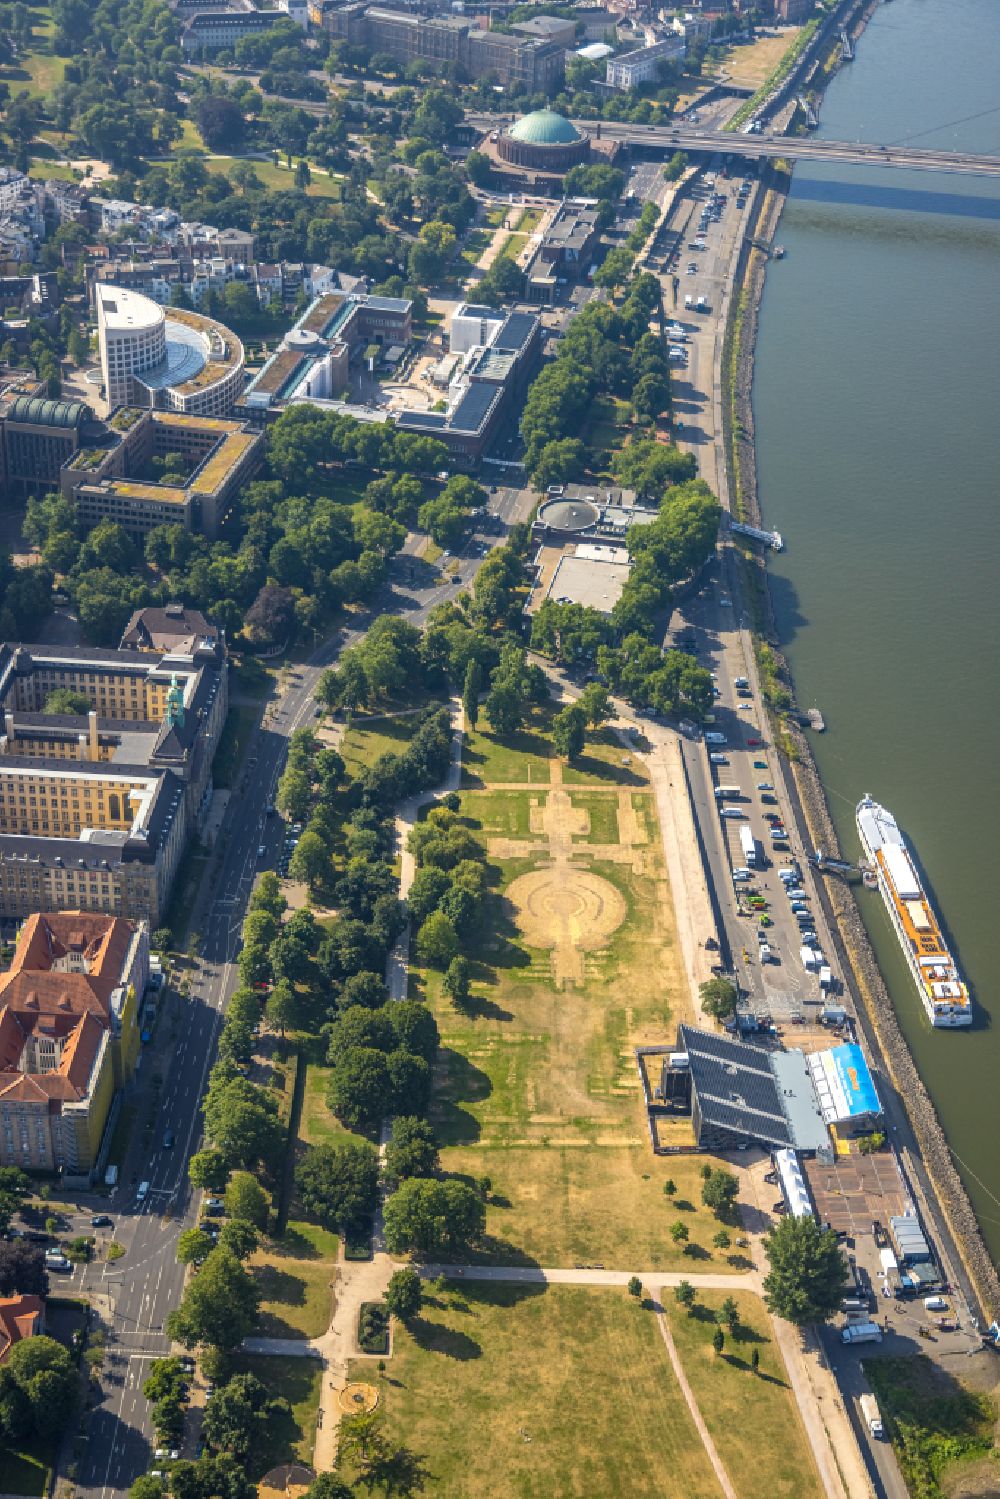 Aerial photograph Düsseldorf - Riparian zones on the course of the river of Rheins with a view over Kulturbuehne in Rheinpark - Beachclub - Plantours Kreuzfahrten in Duesseldorf in the state North Rhine-Westphalia, Germany